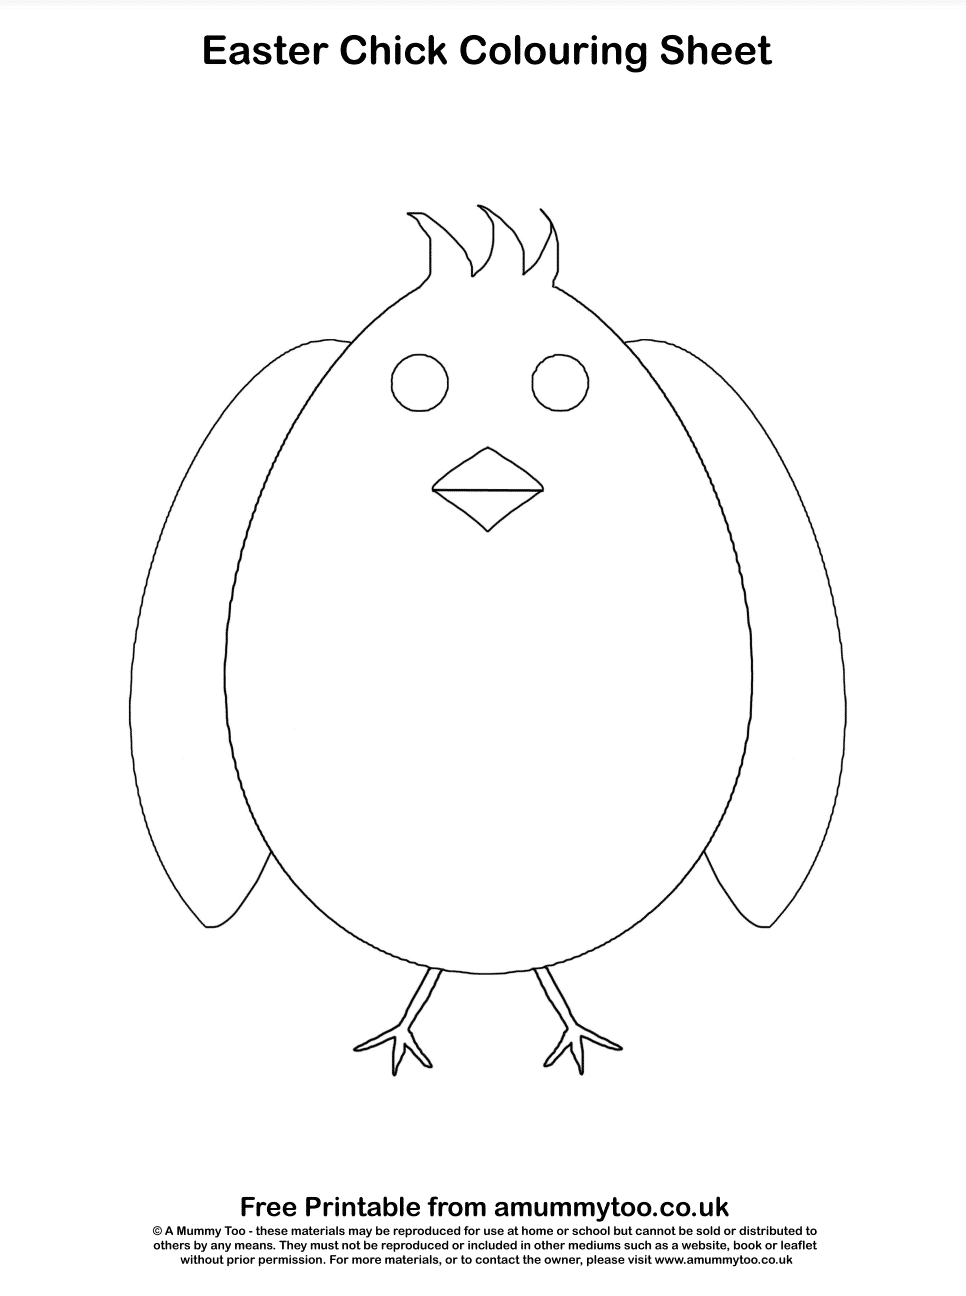 Outline of an Easter chick, ready to colour in. Caption reads: Easter Chick colouring sheet.